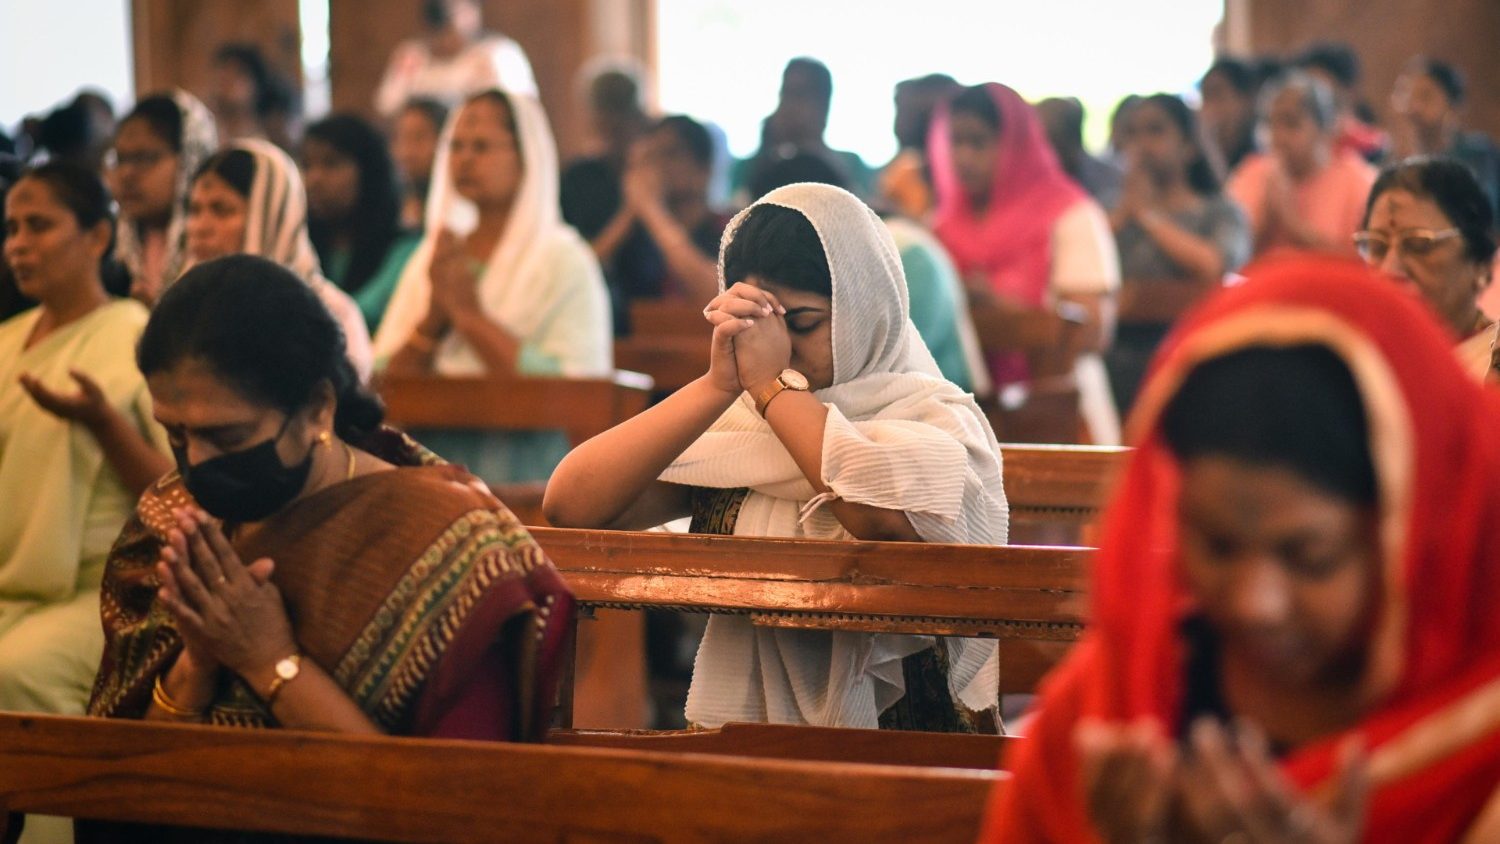 India: Bishops call for progress that benefits everyone